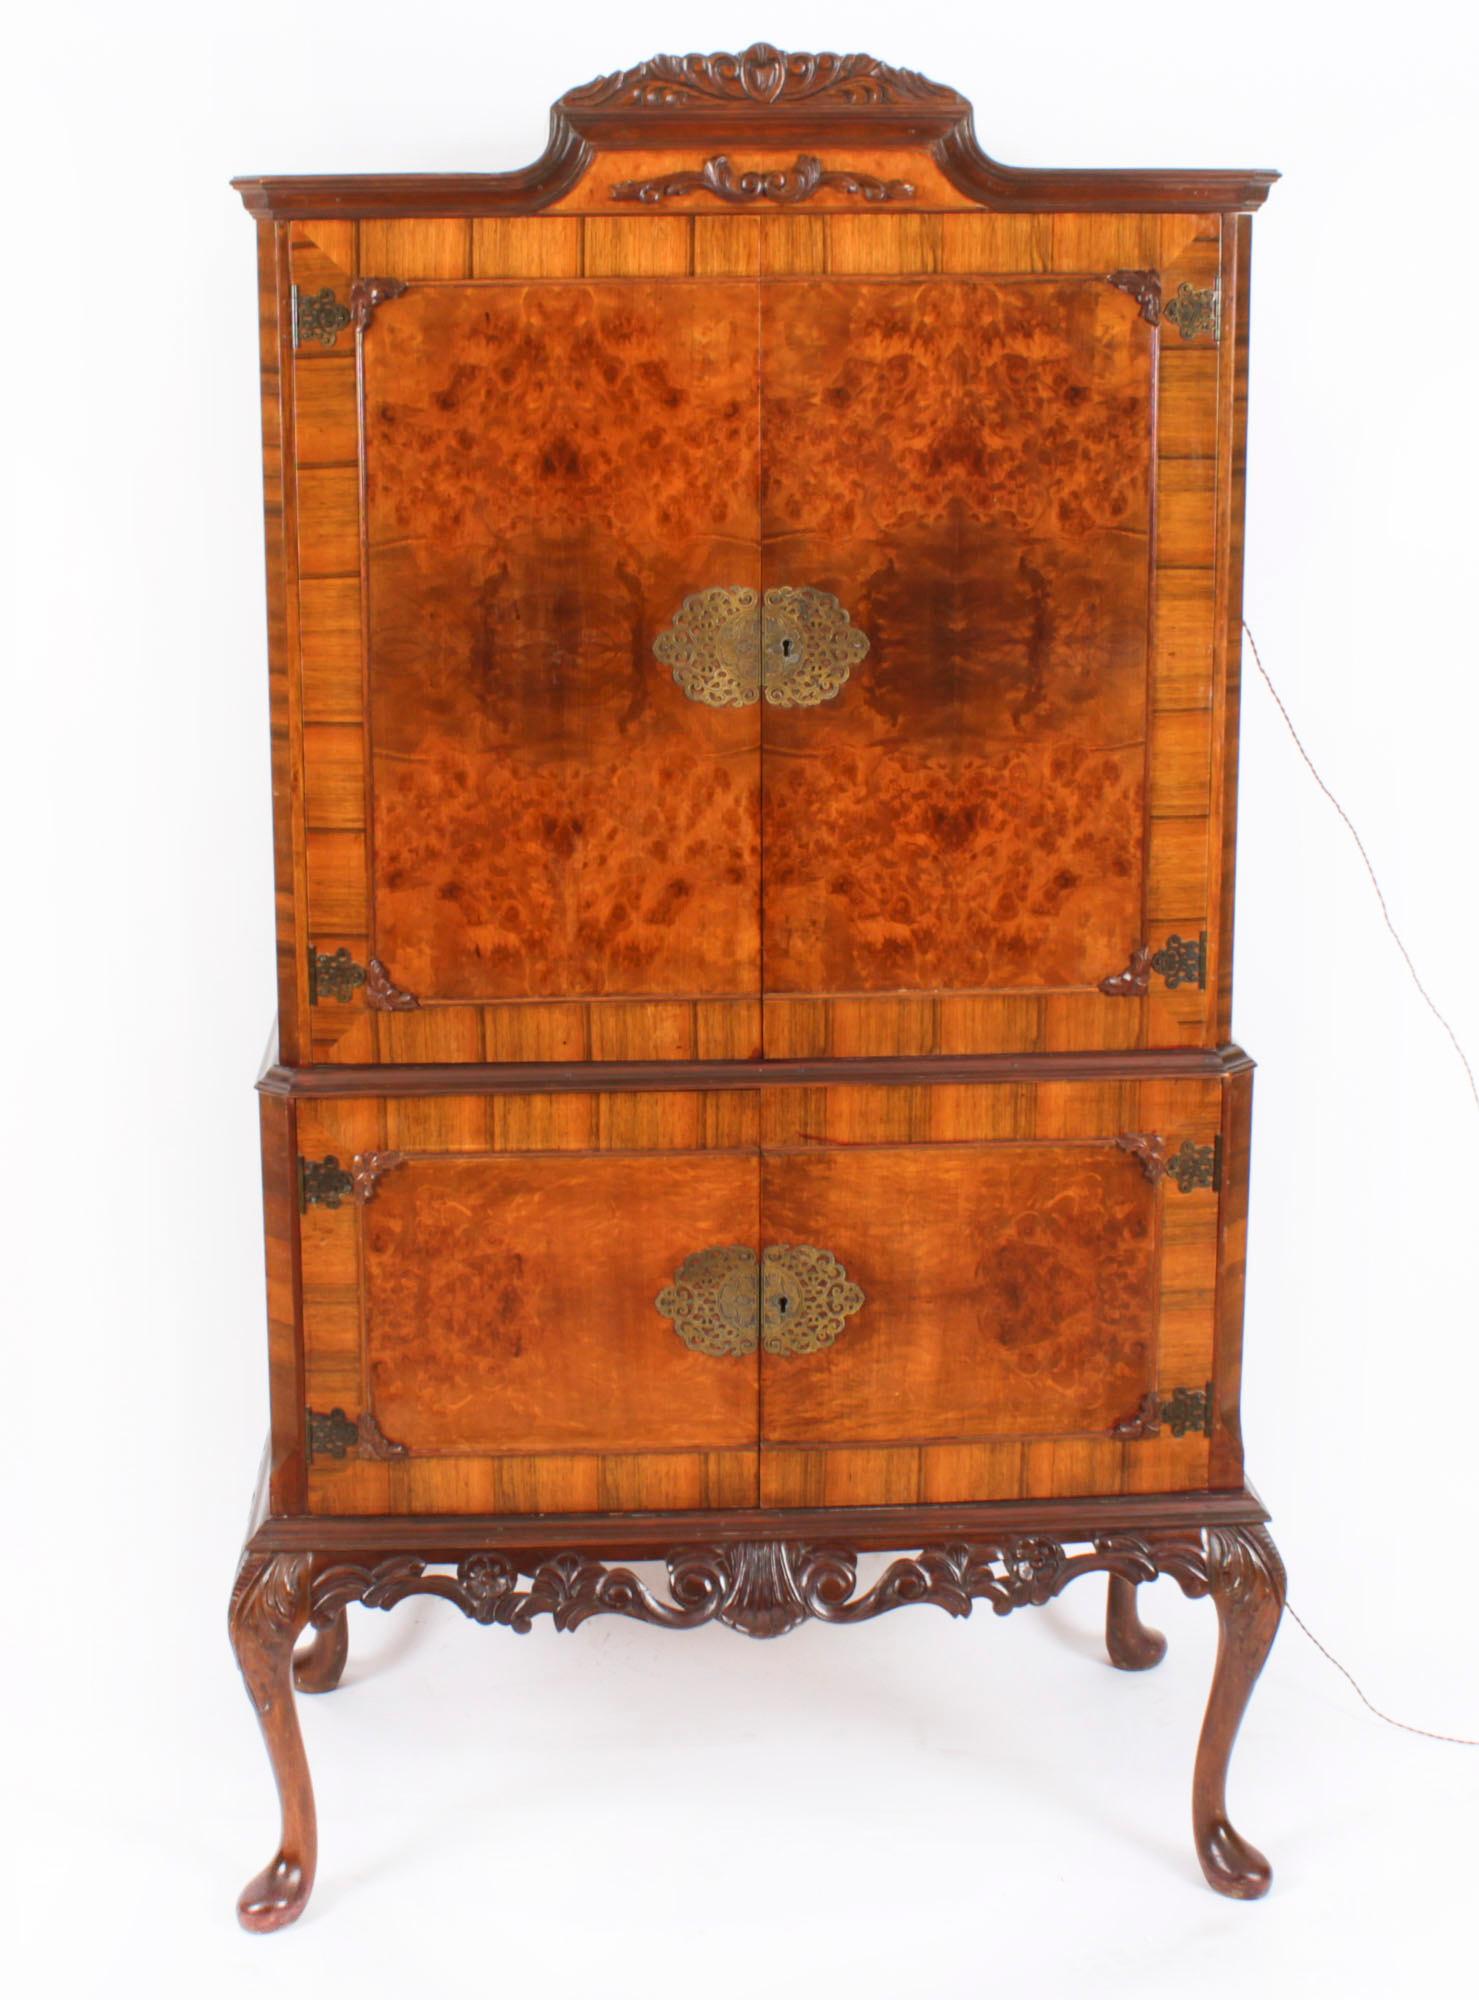 This is a fantastic vintage  burr walnut cocktail cabinet with fitted and mirrored maple interior, dating from the mid 20th Century.

The upper part comprises a decorative carved cornice above a pair of doors with decorative hinges and a large